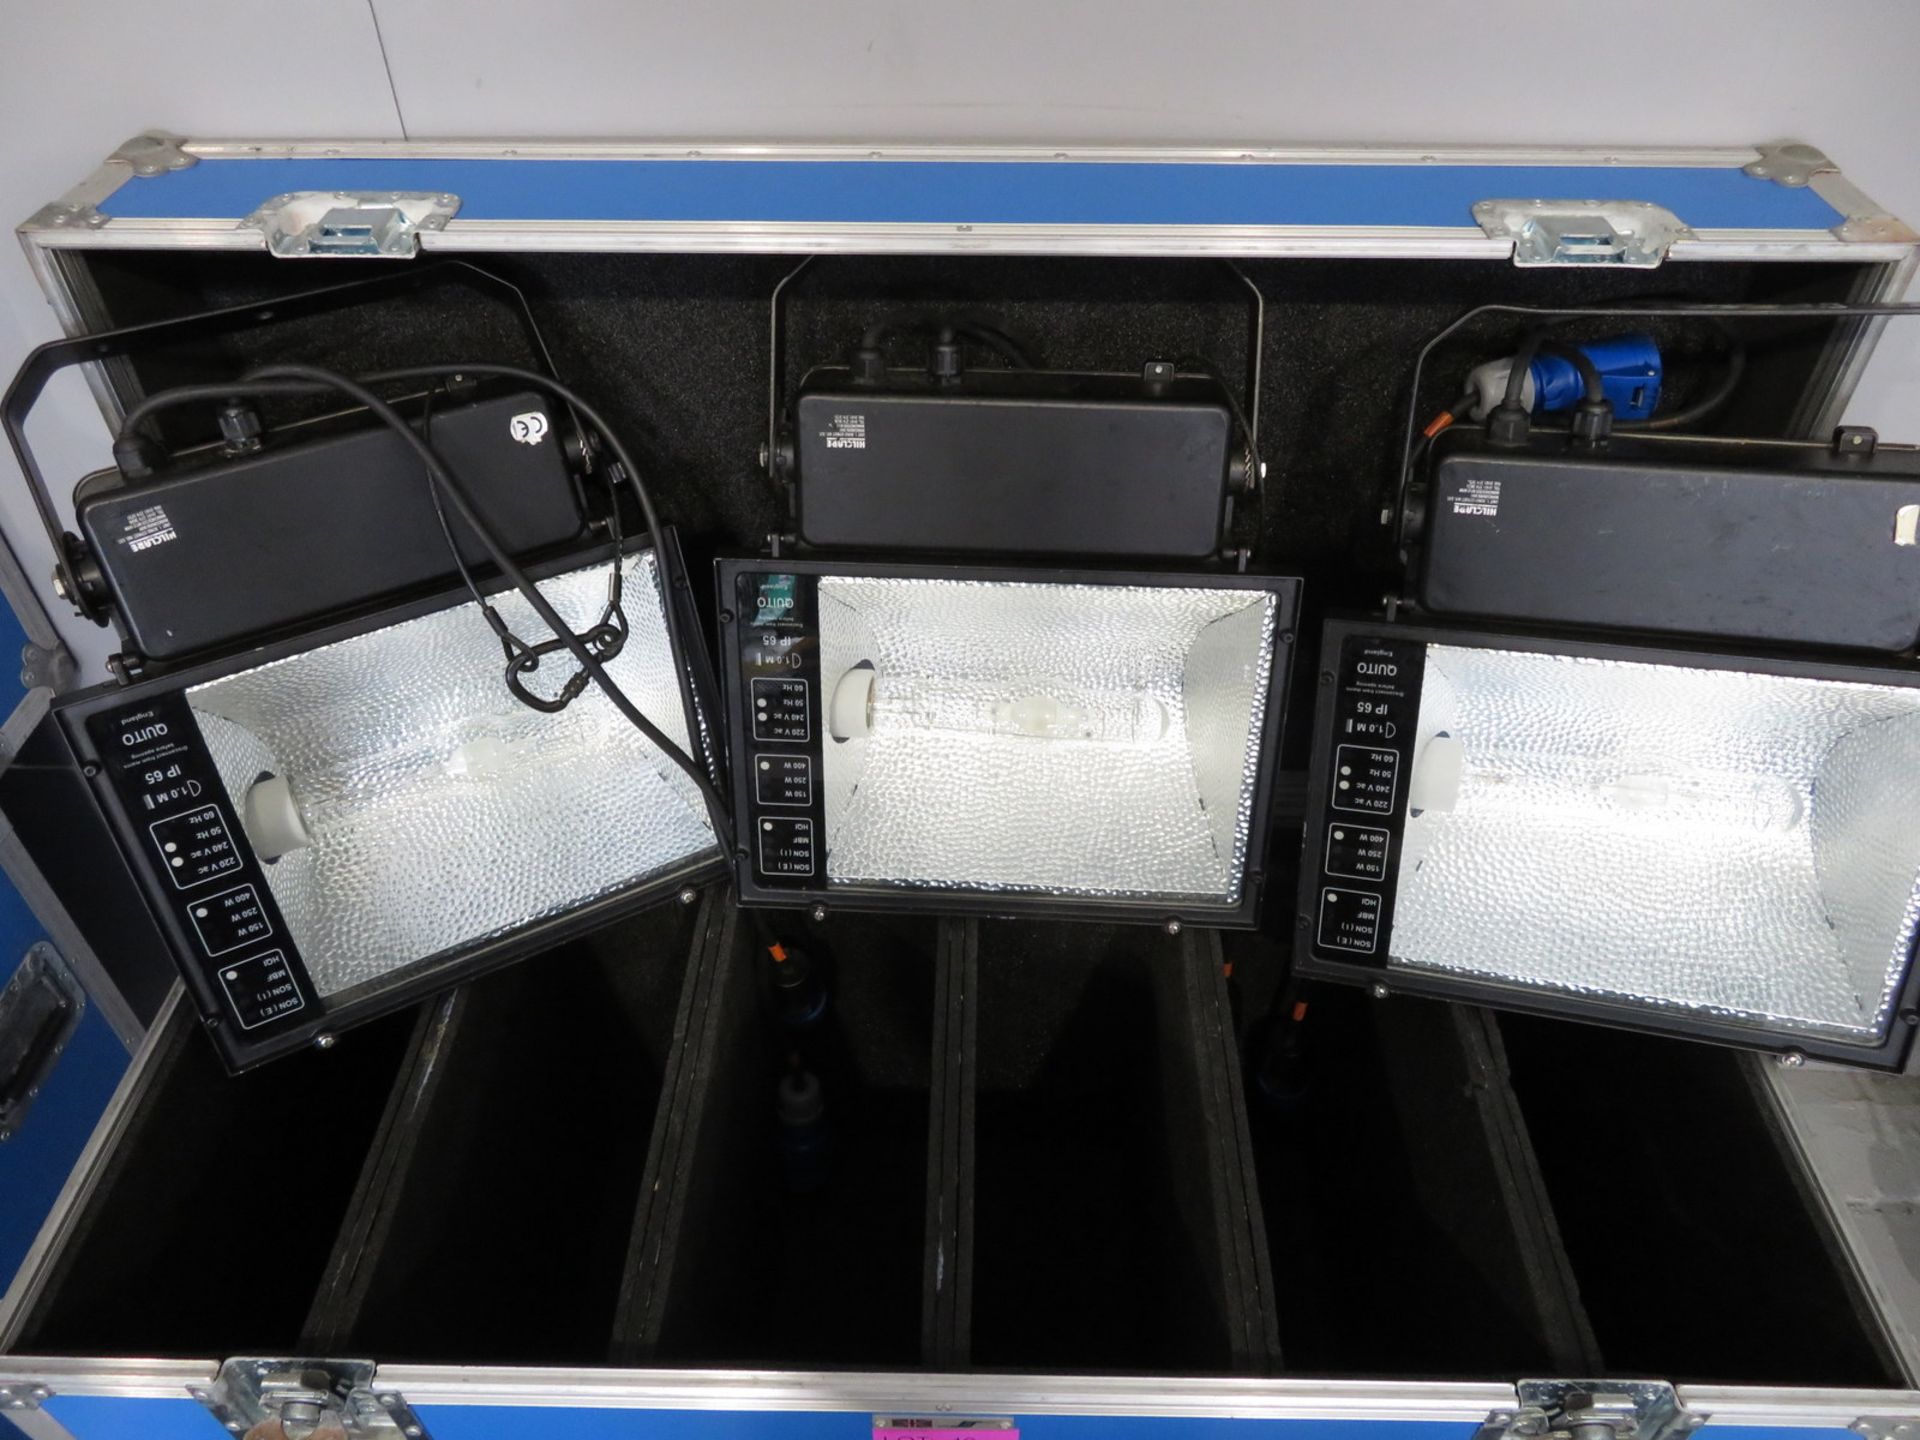 6x HQI 400w Floodlights in flight case. Includes safety bonds. Working condition. - Image 2 of 6